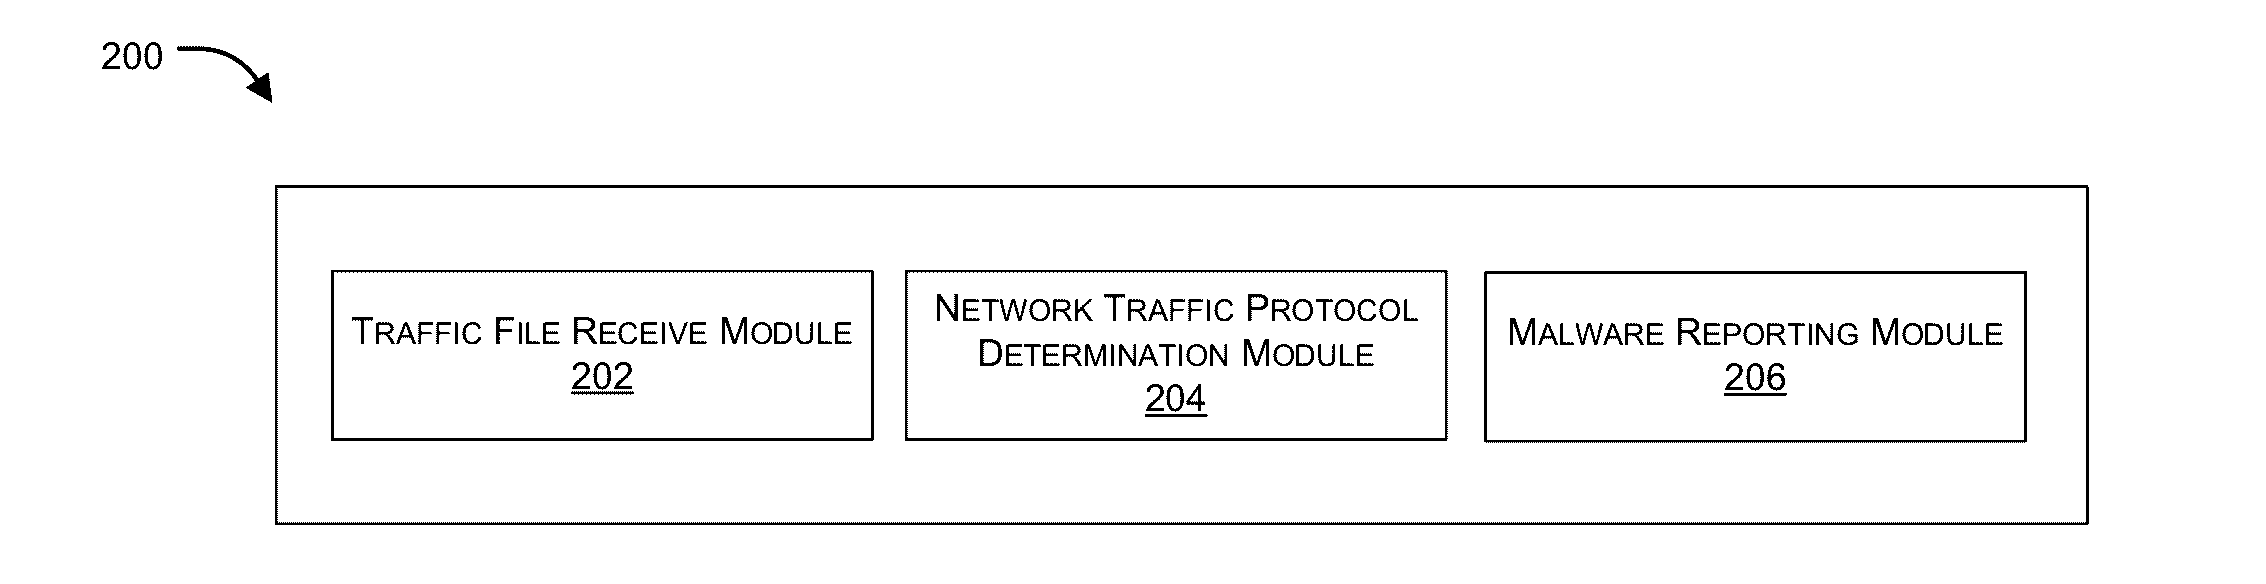 Protocol based detection of suspicious network traffic